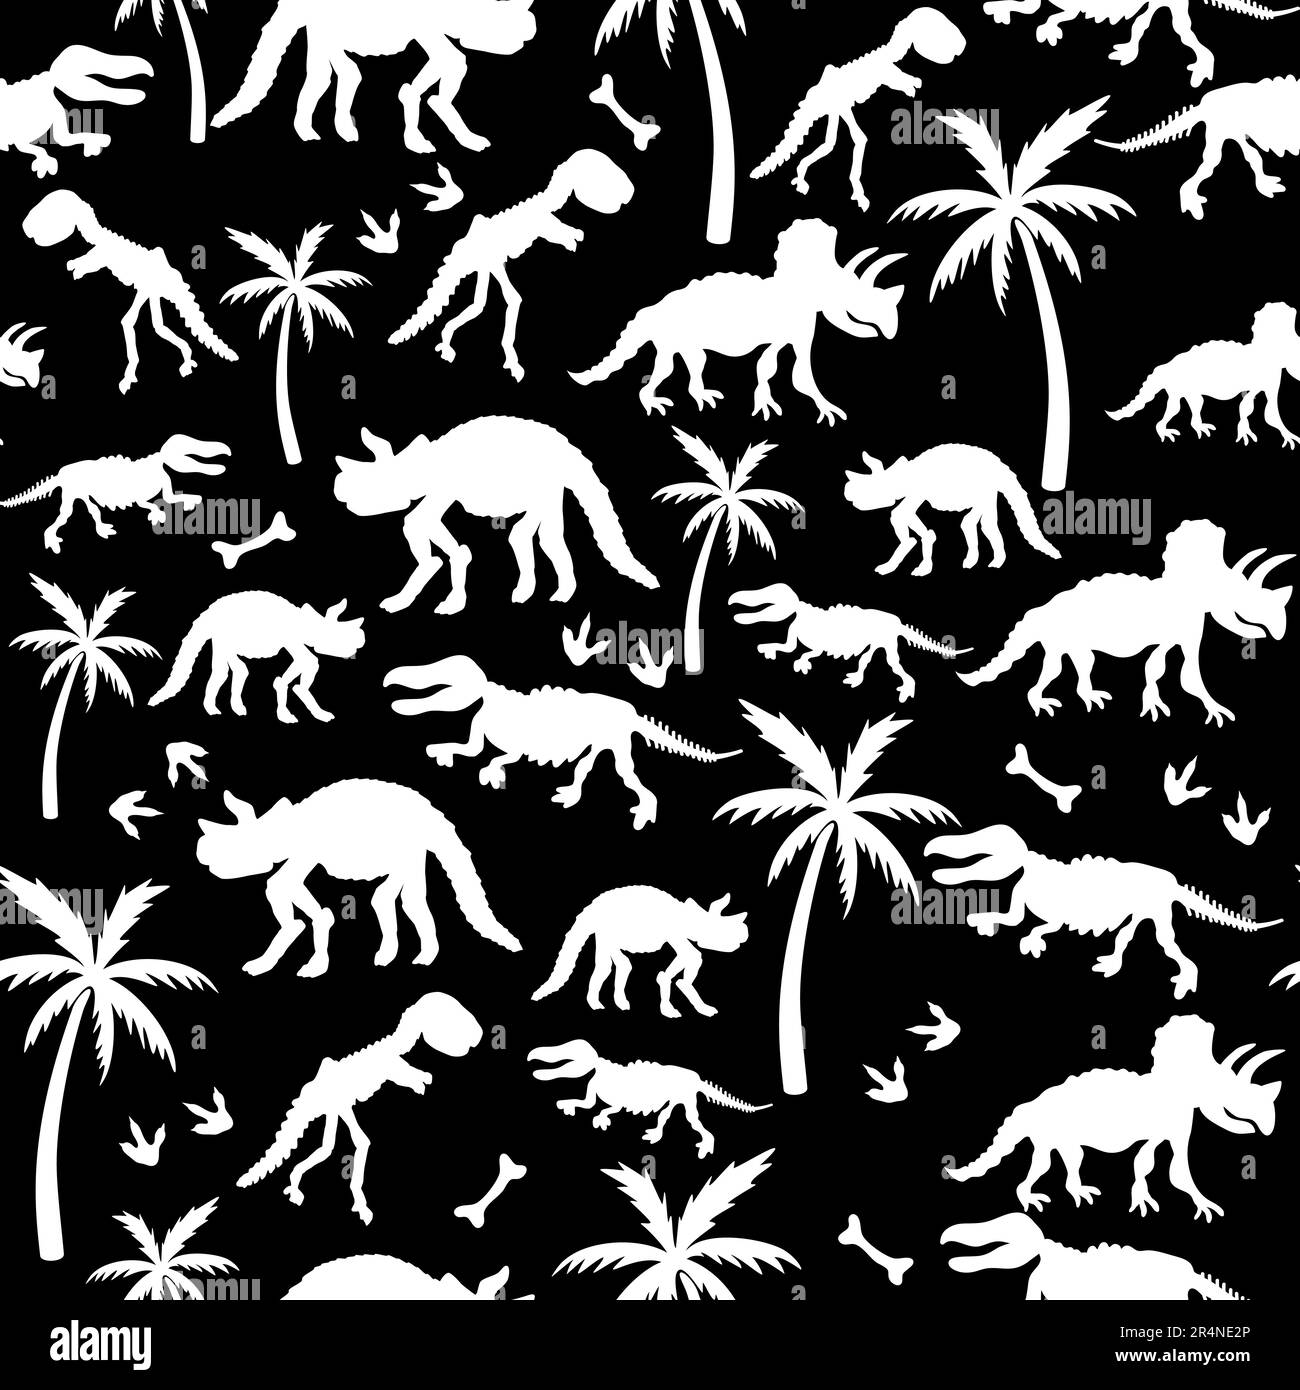 Dinosaur skeleton and palm trees Seamless pattern. Print for T-shirts, textiles, web. Stock Vector